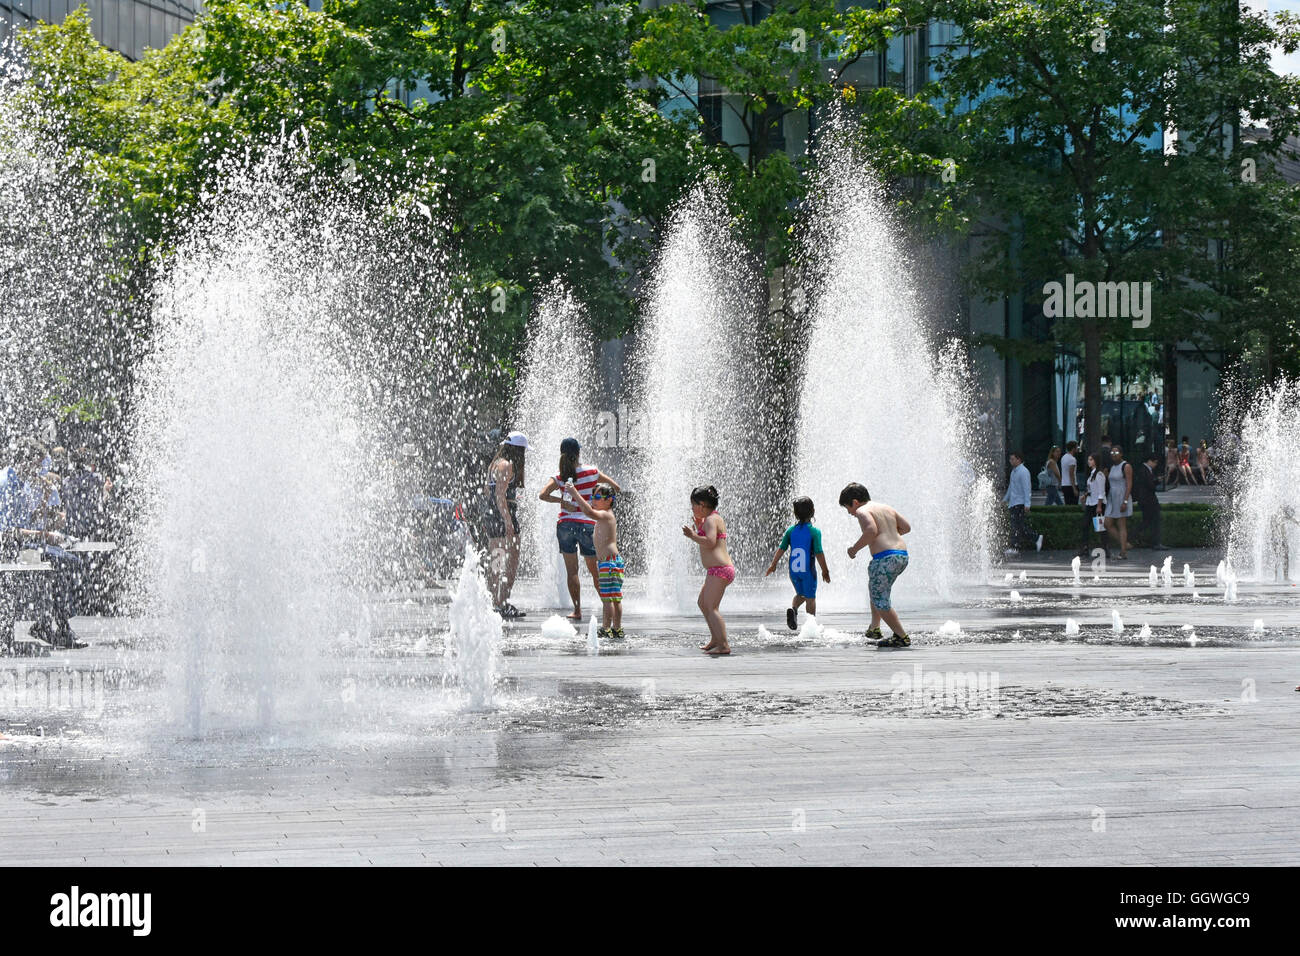 Children playing in variable height water fountain jets at random timings during hot summer weather ideal for kids outdoors London England UK Stock Photo